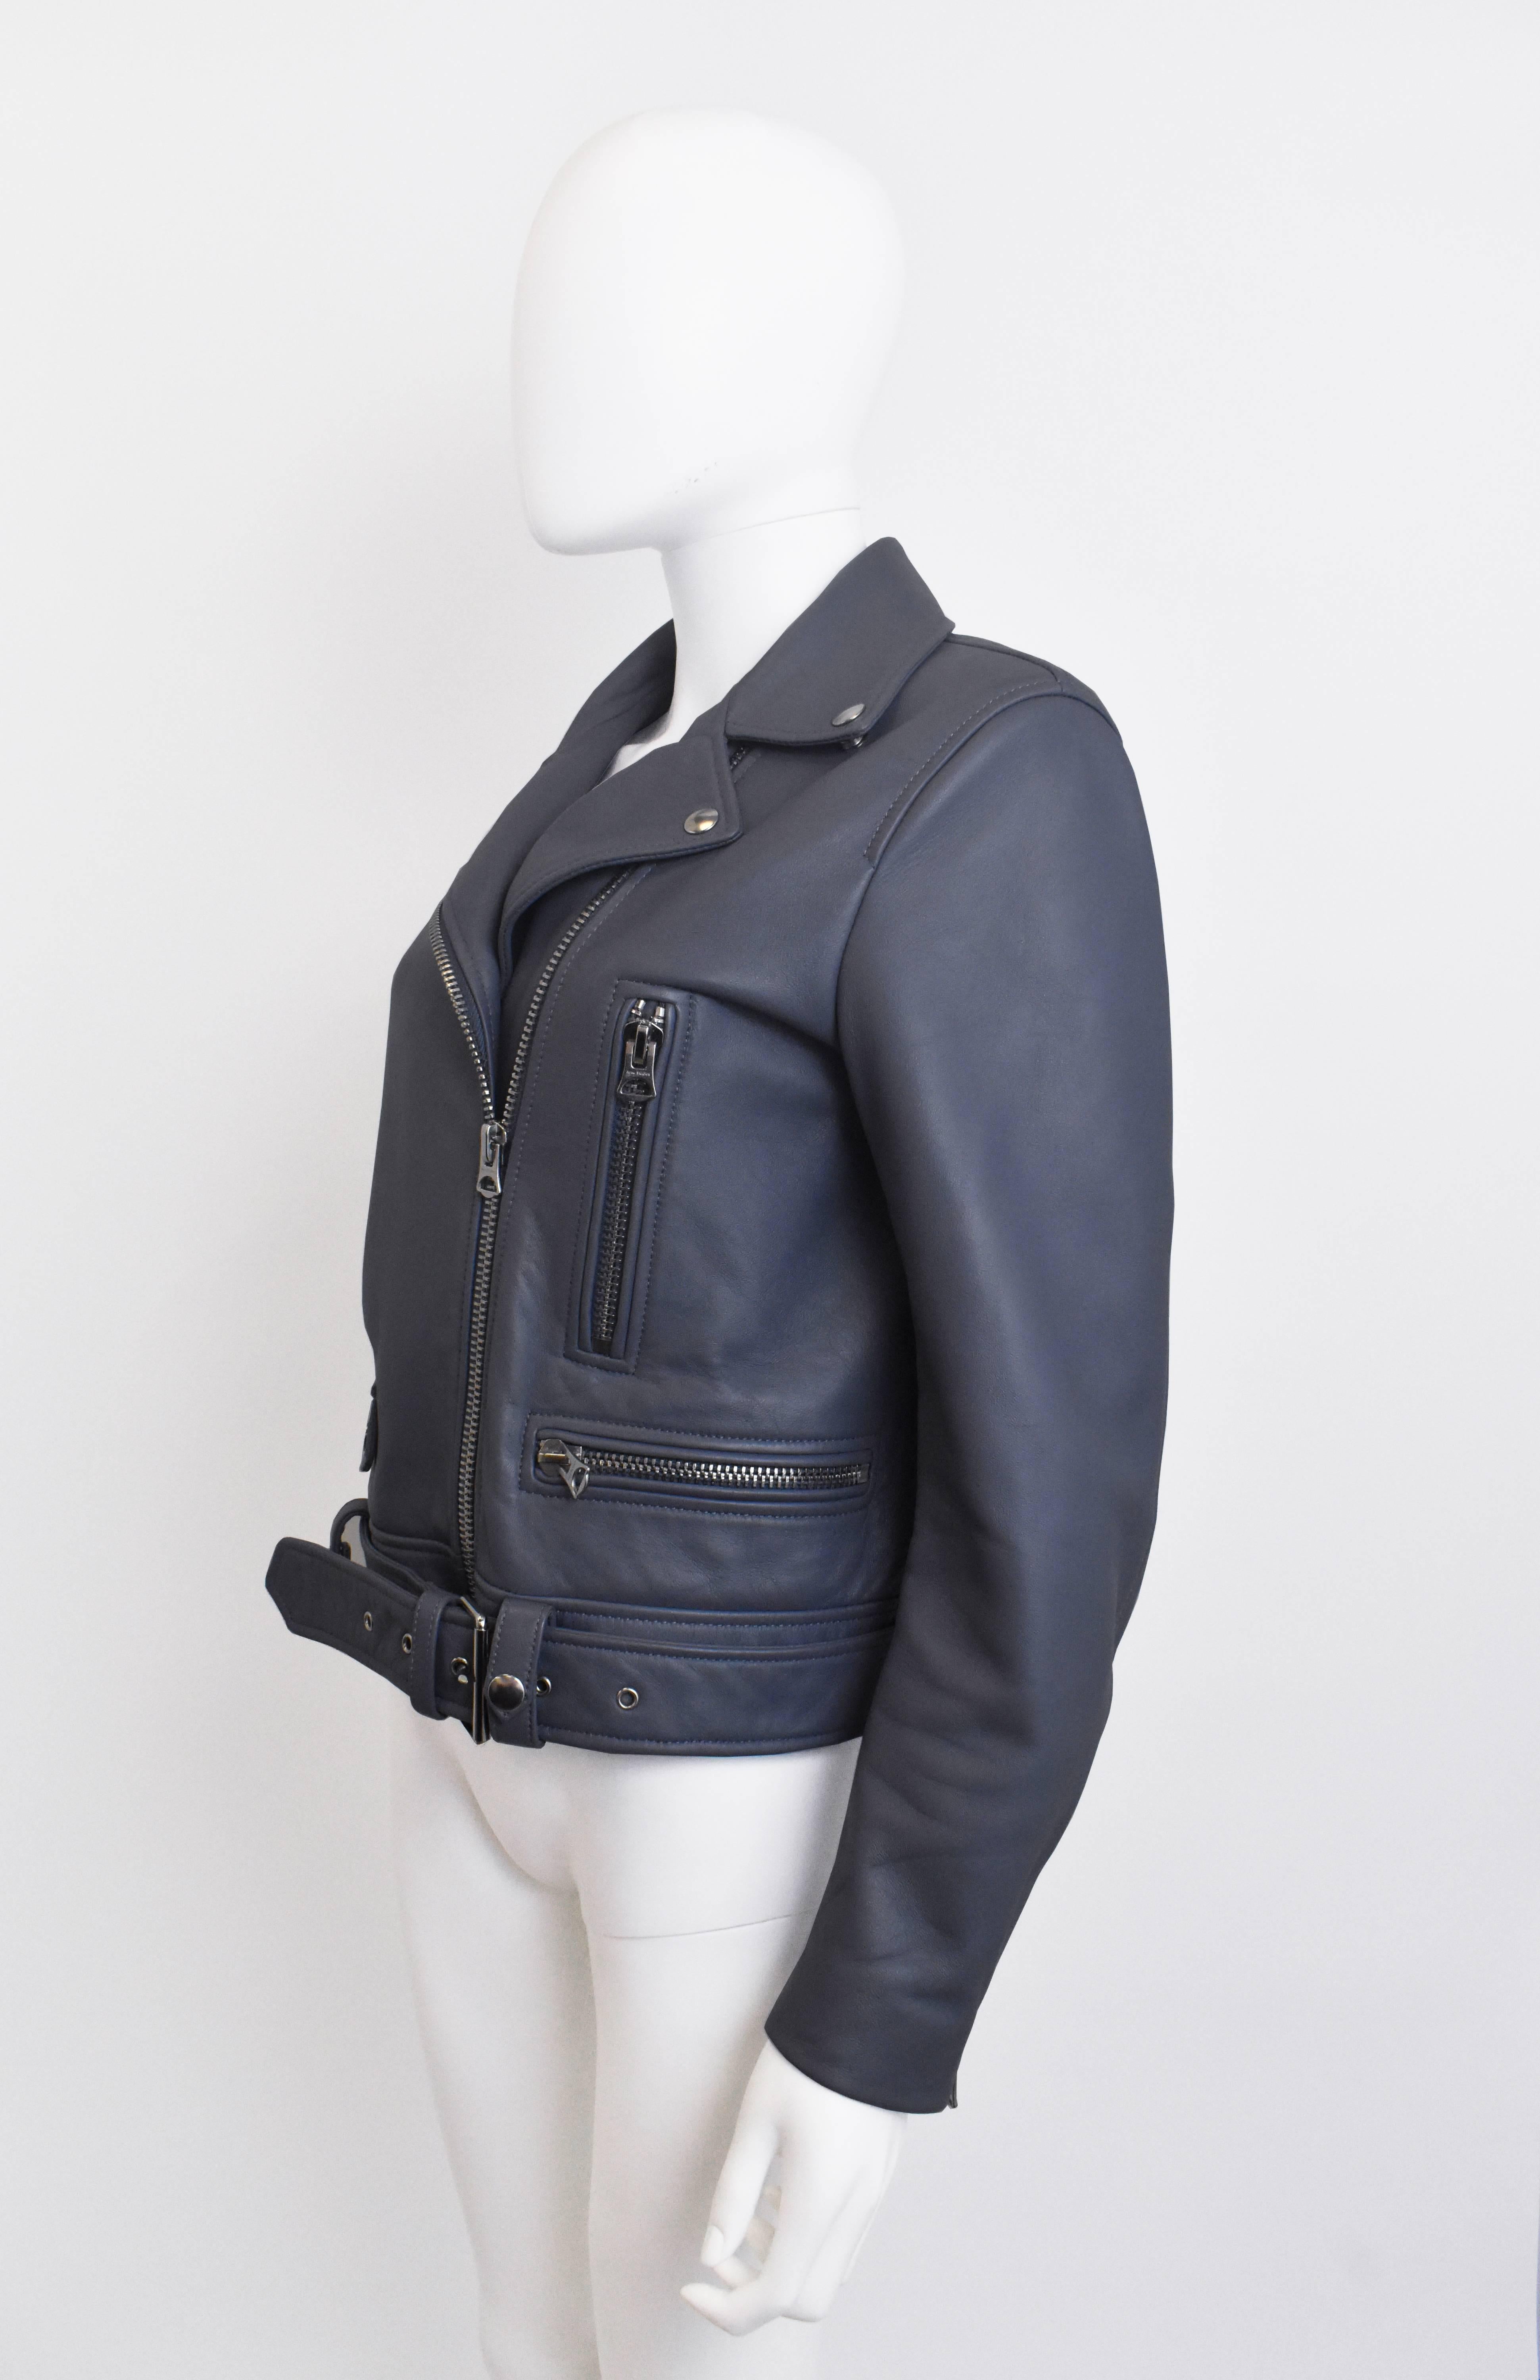 A classic biker jacket with a modern twist, this jacket from Acne Studios is made from a blue/purple dyed leather and cut in the design house's signature style. With its boxy silhouette, asymmetric zip, collar, belt and silver hardware details, the